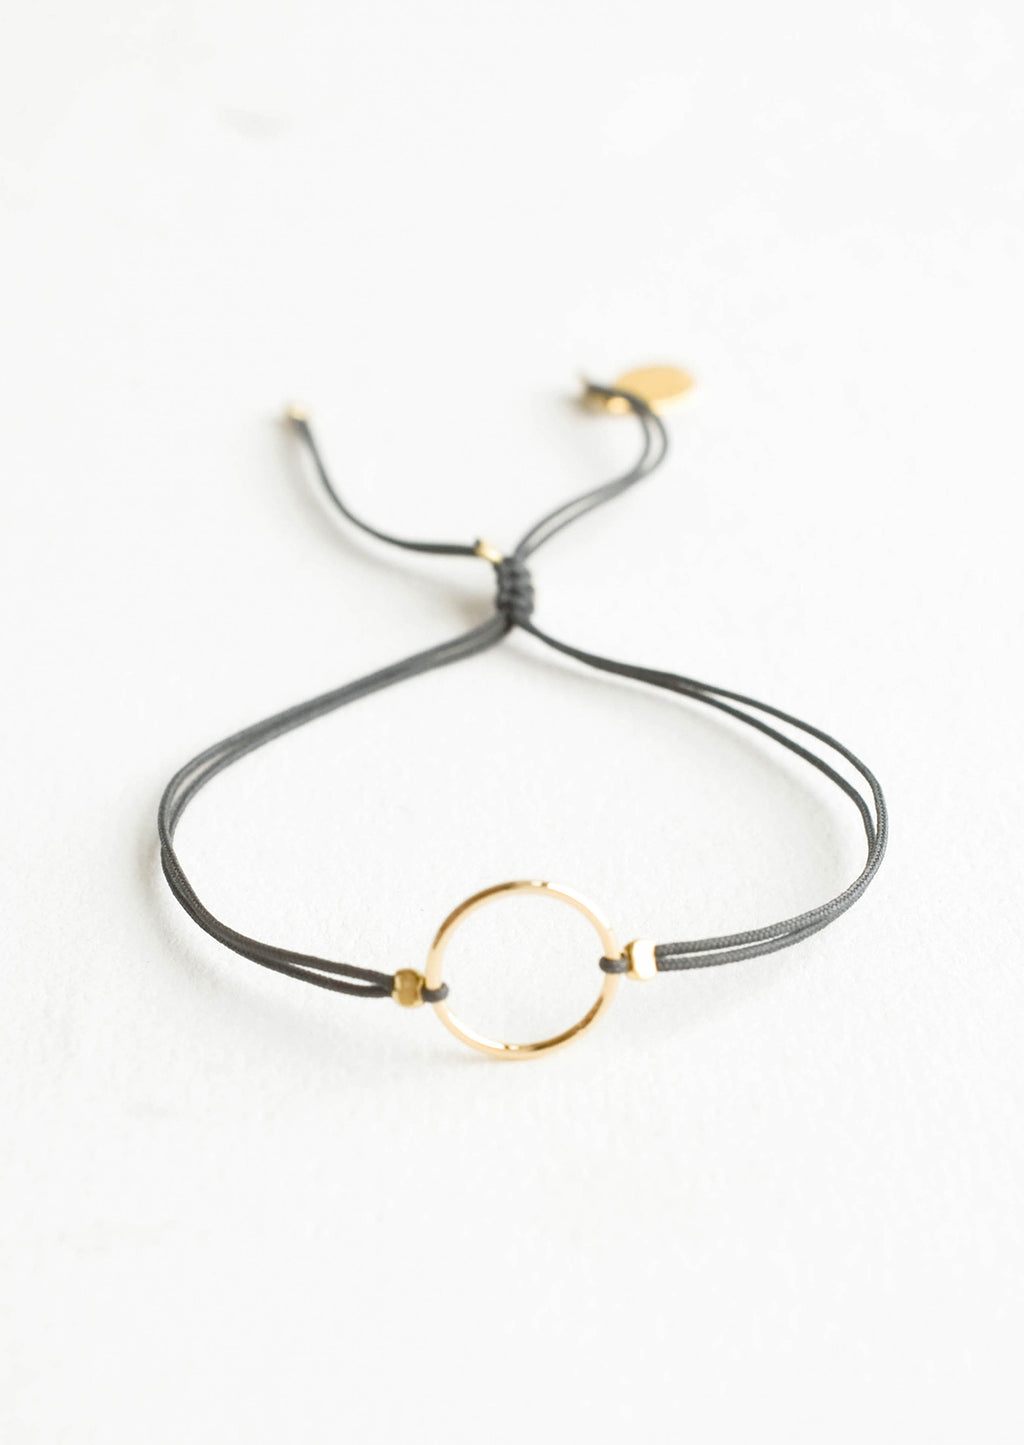 Charcoal: Bracelet with yellow gold circle charm centered on an adjustable dark grey string.